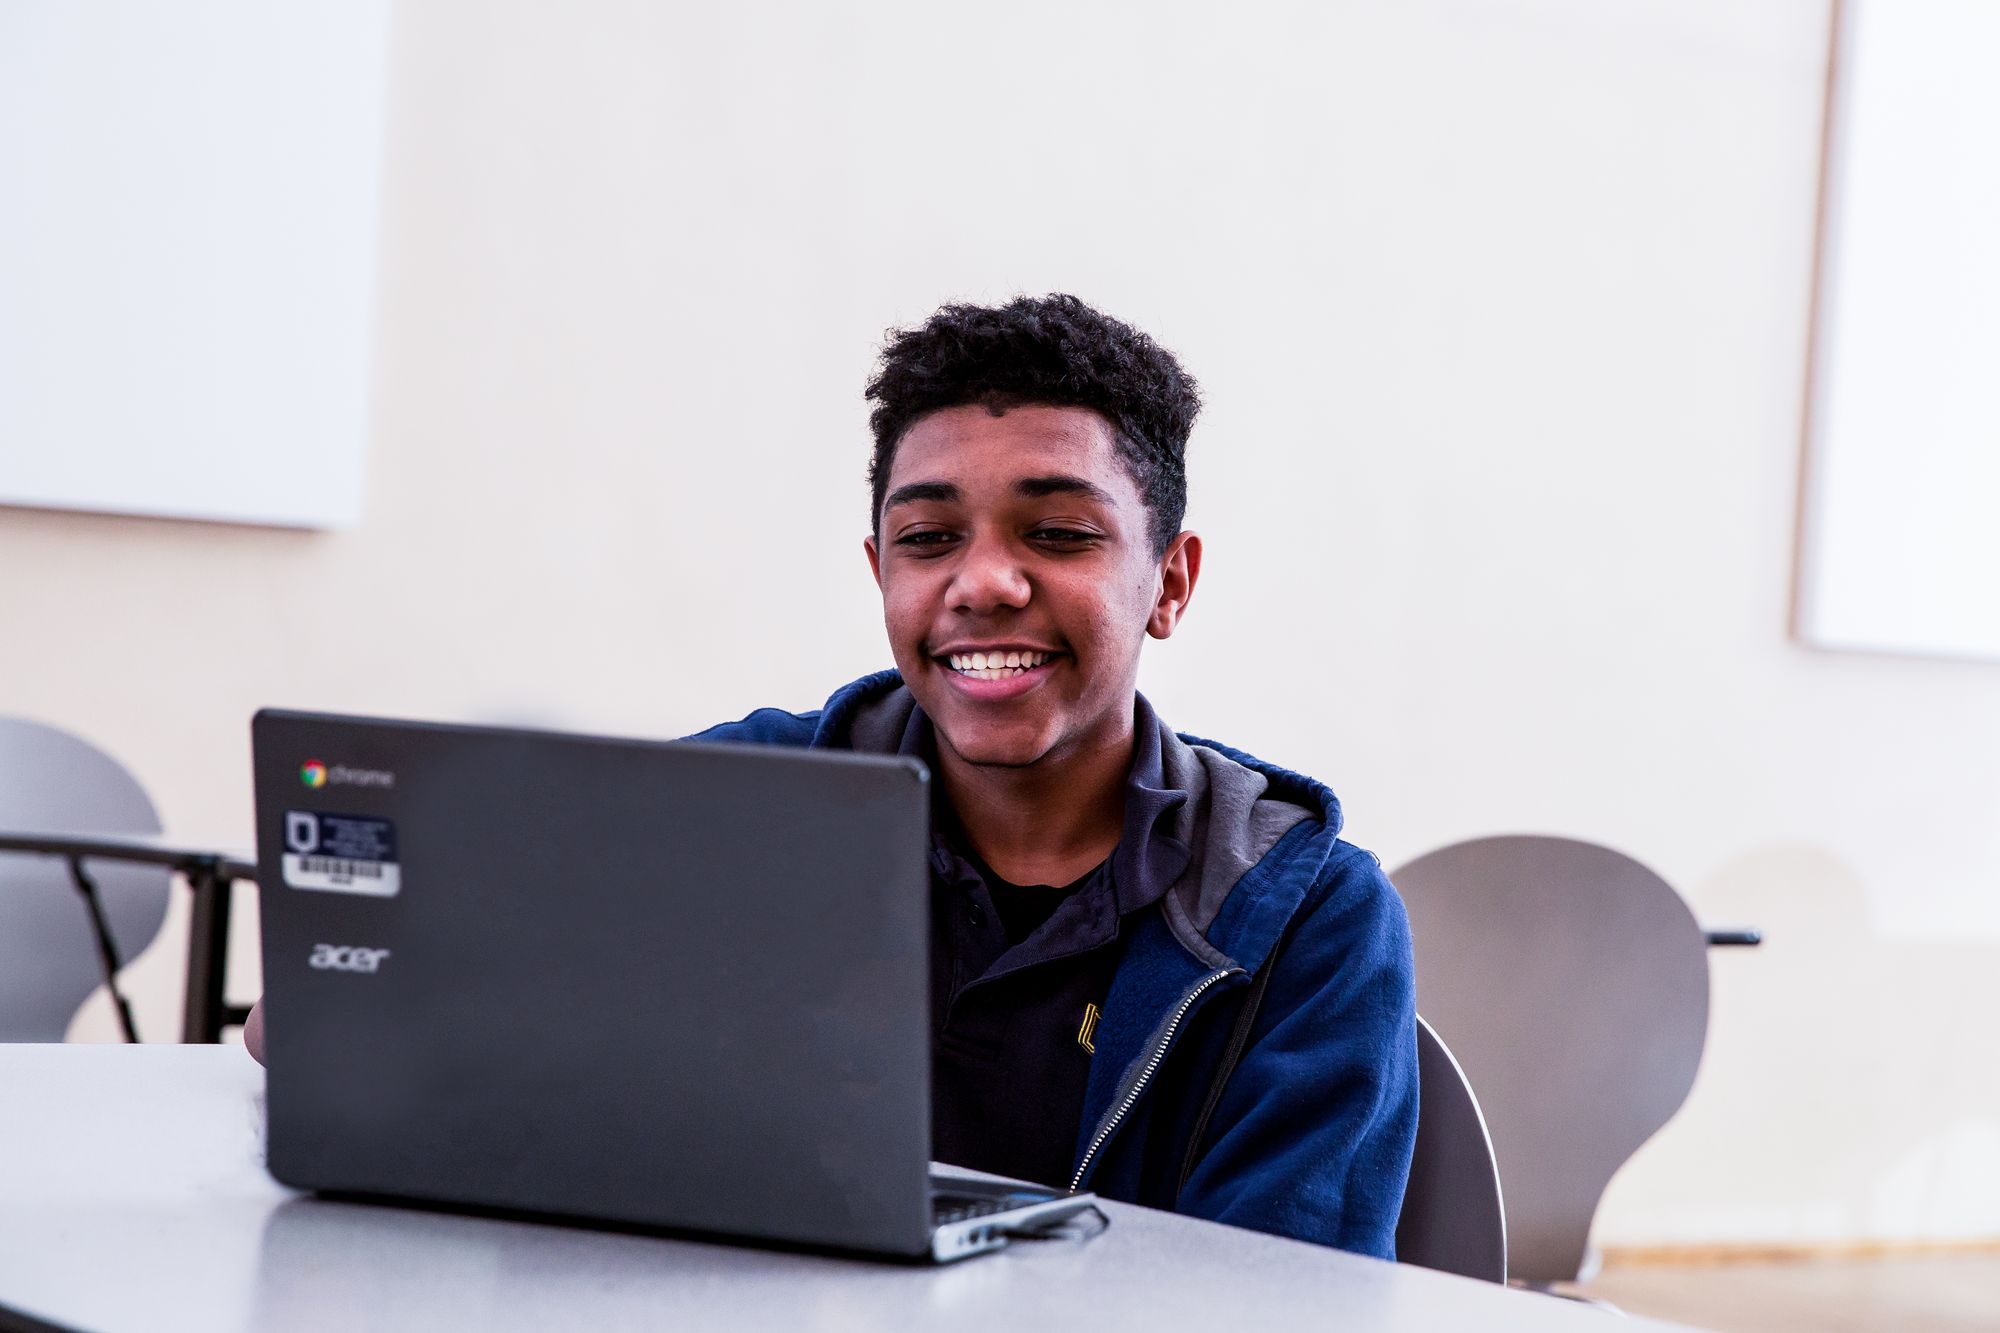 Teenage student smiles at his laptop in classroom.